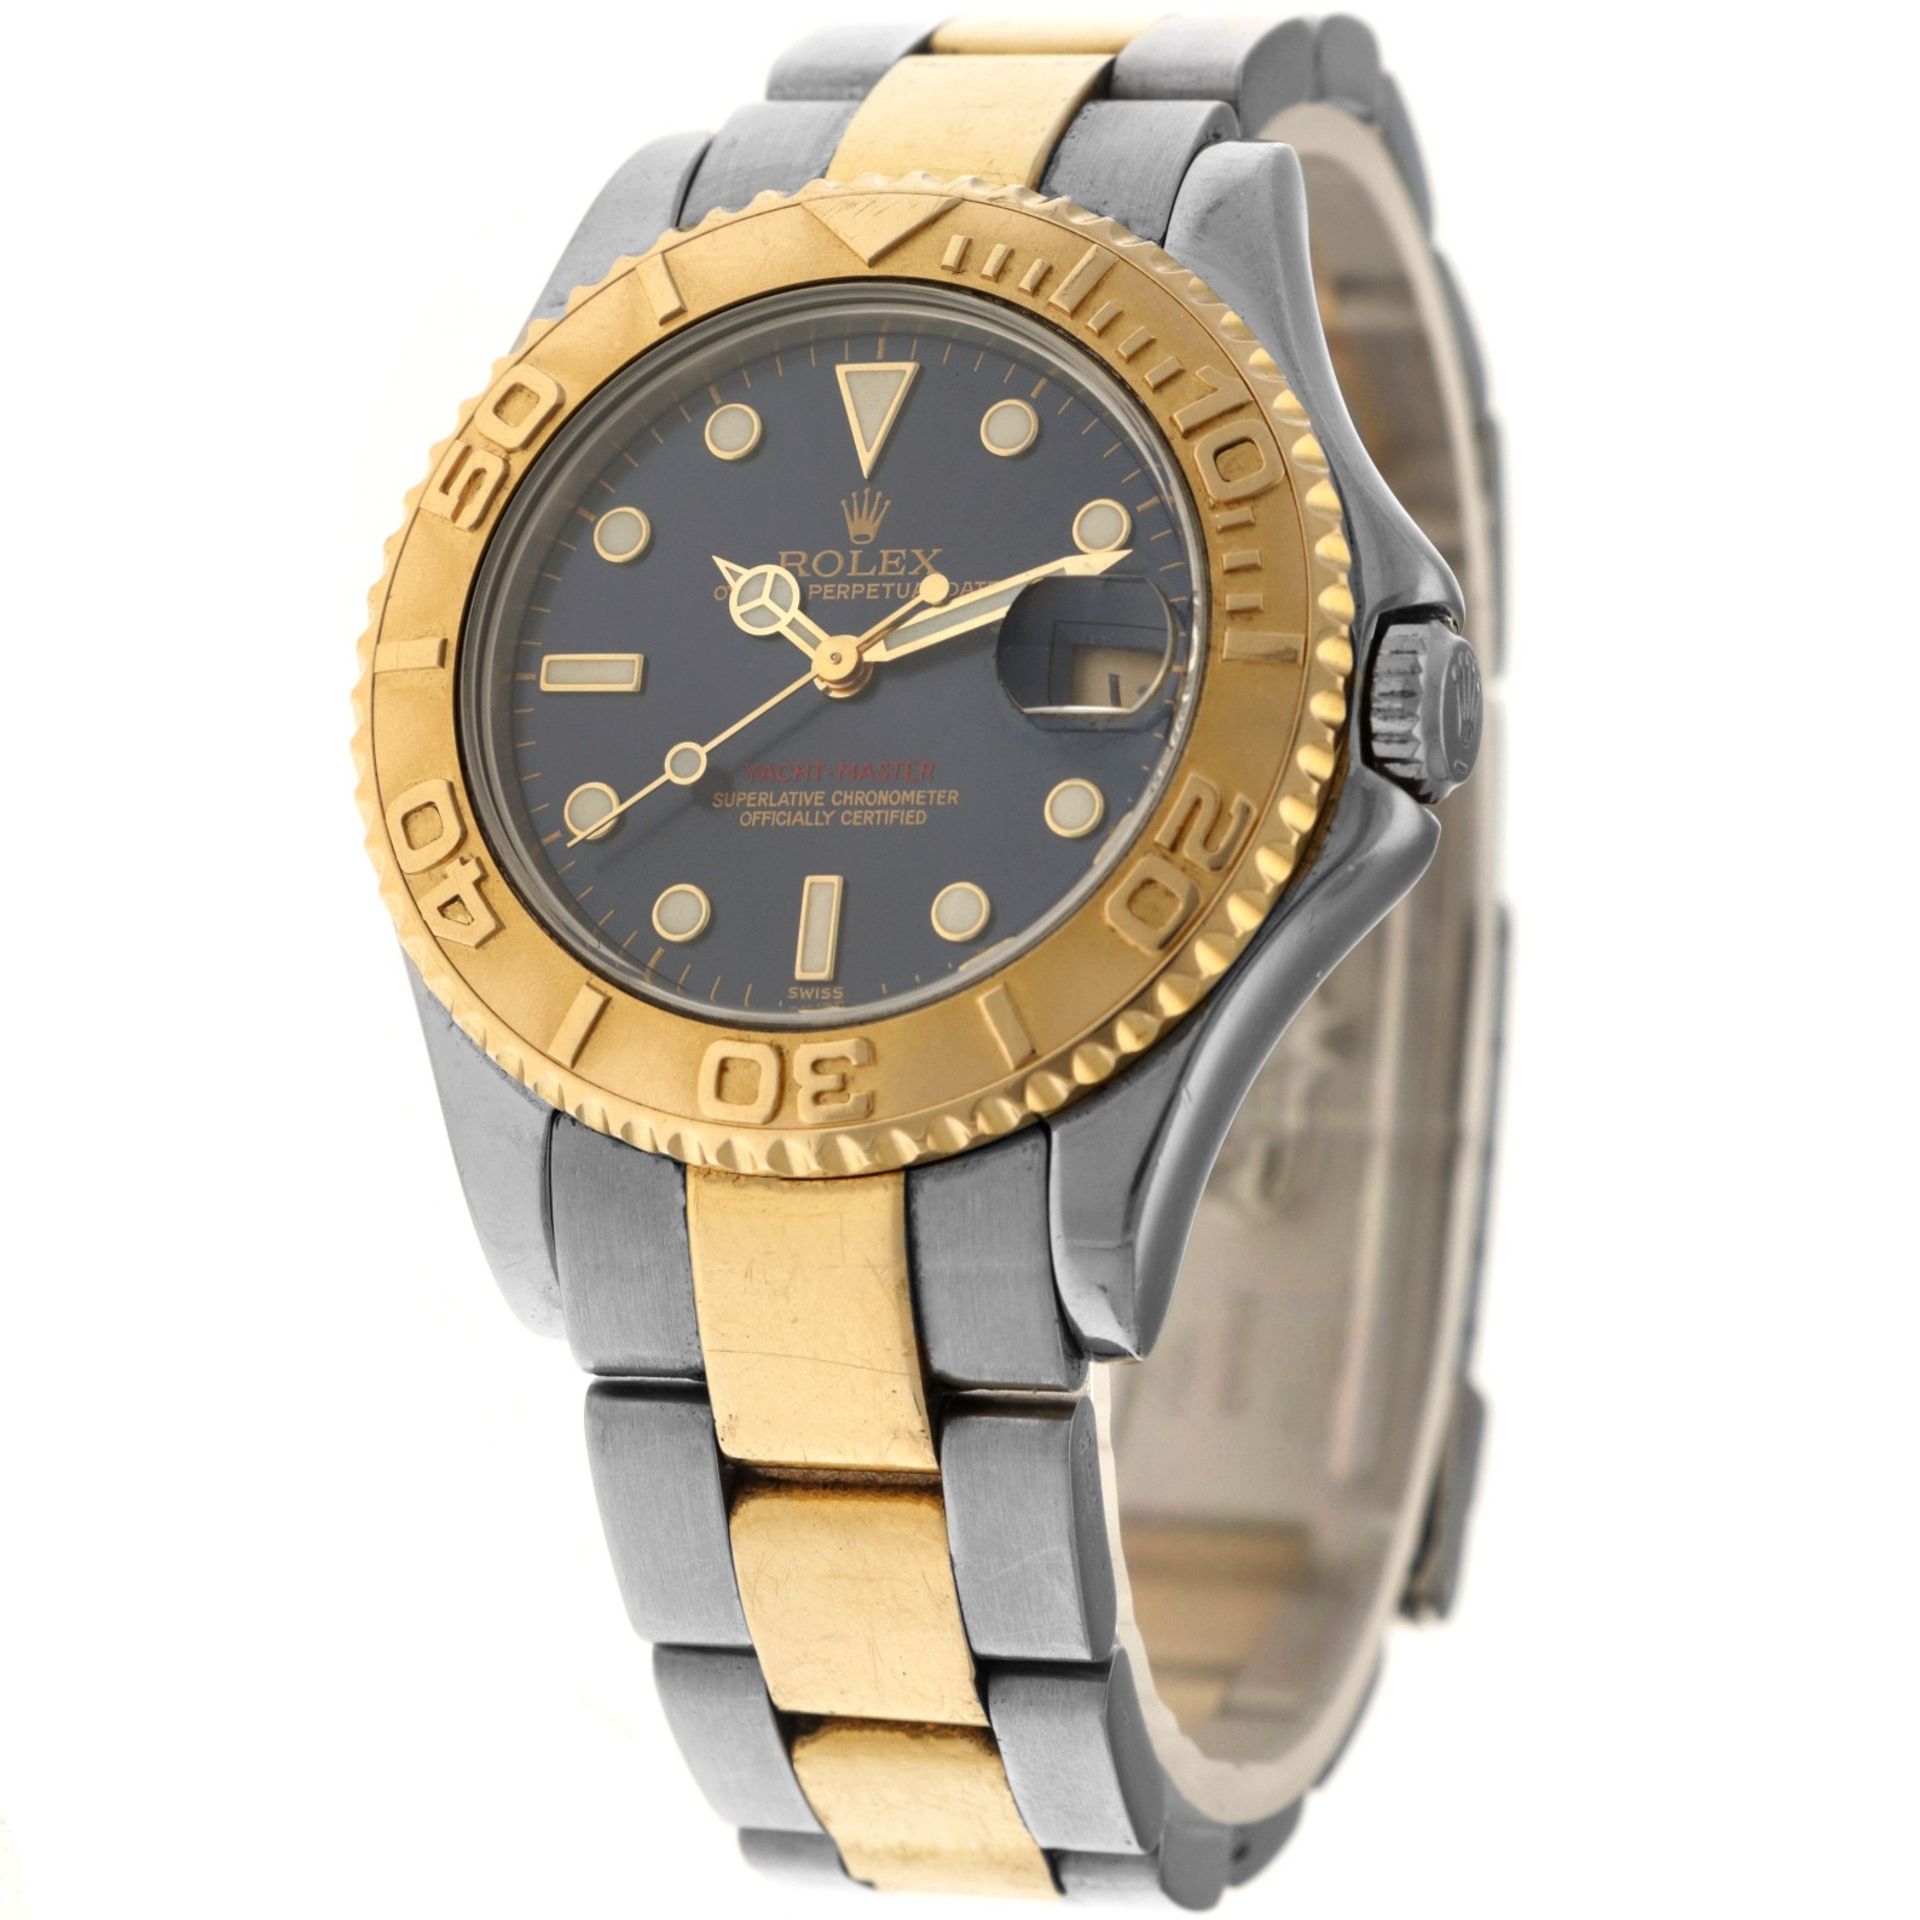 No Reserve - Rolex Yacht-Master 68623 - Midsize - 1998. - Image 2 of 7